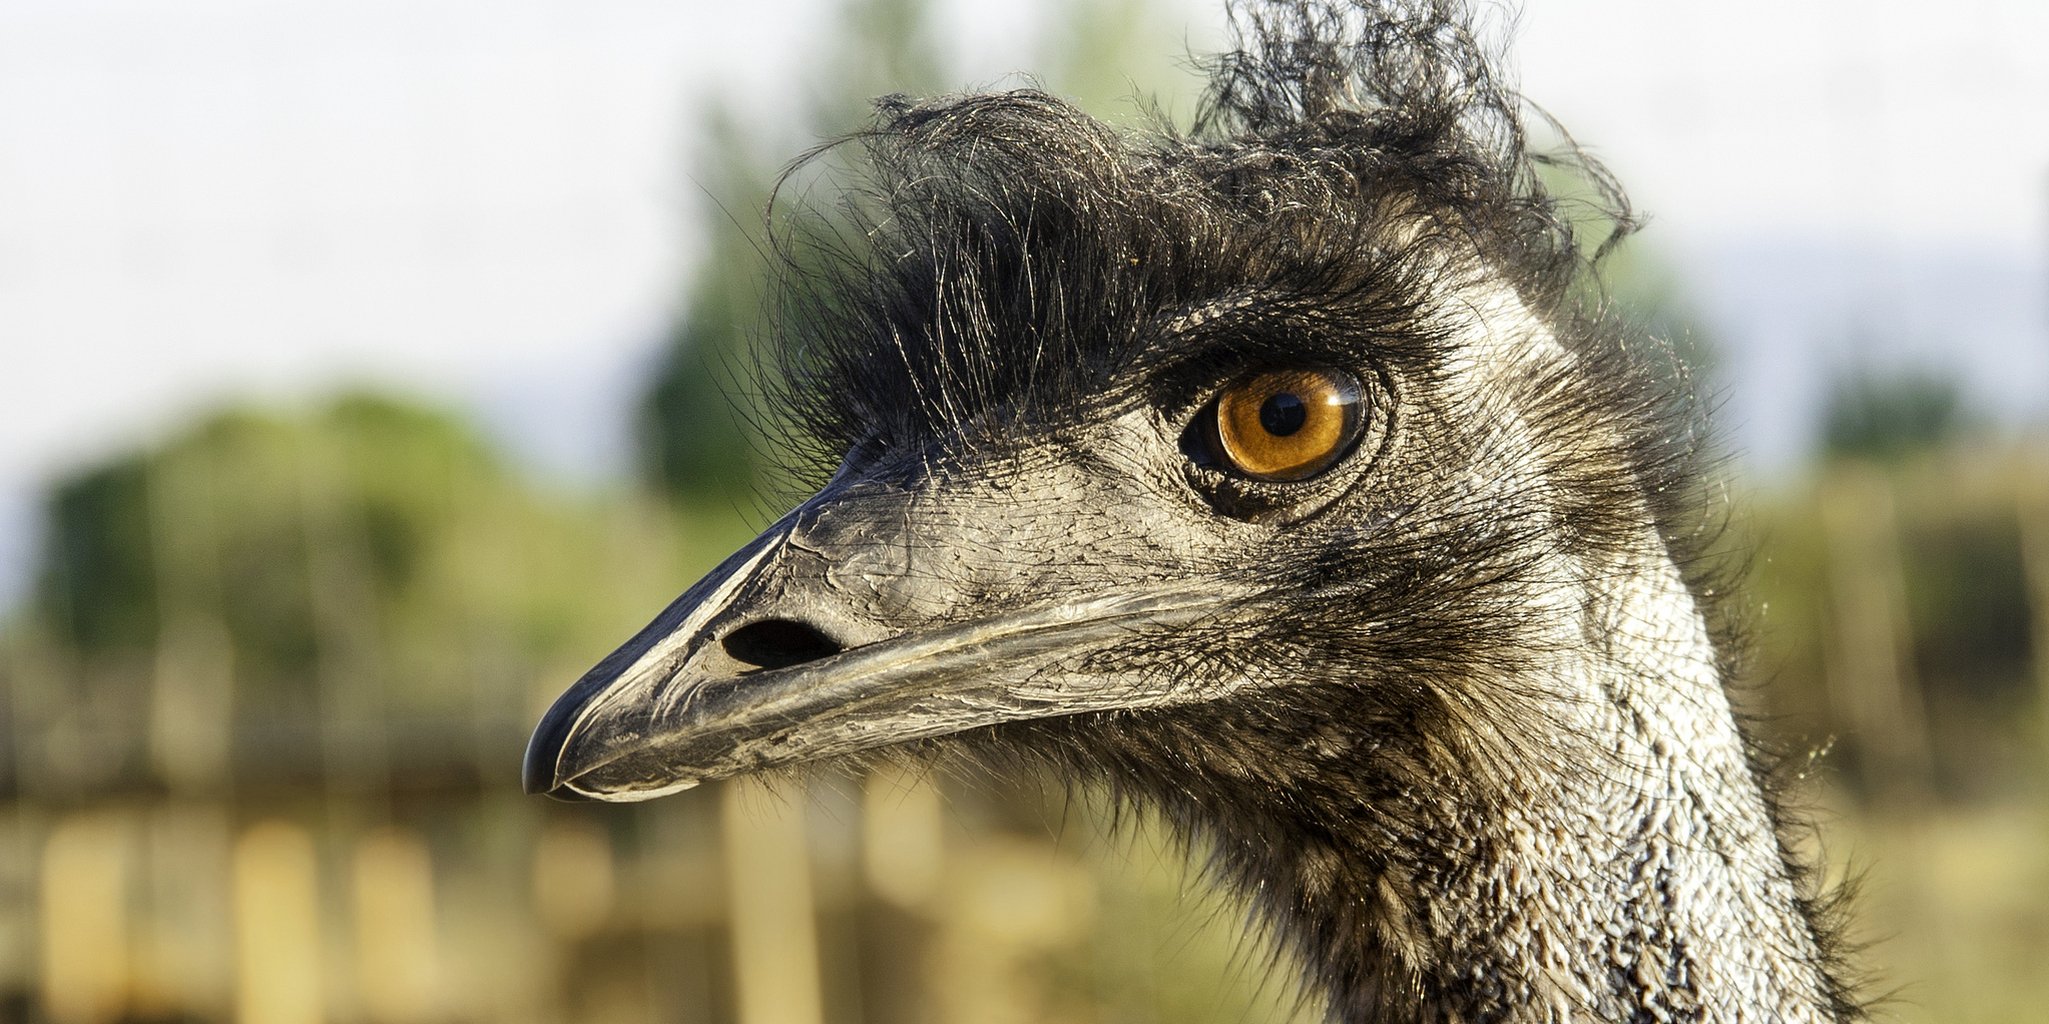 Turns out there are legal consequences for riding an emu to work